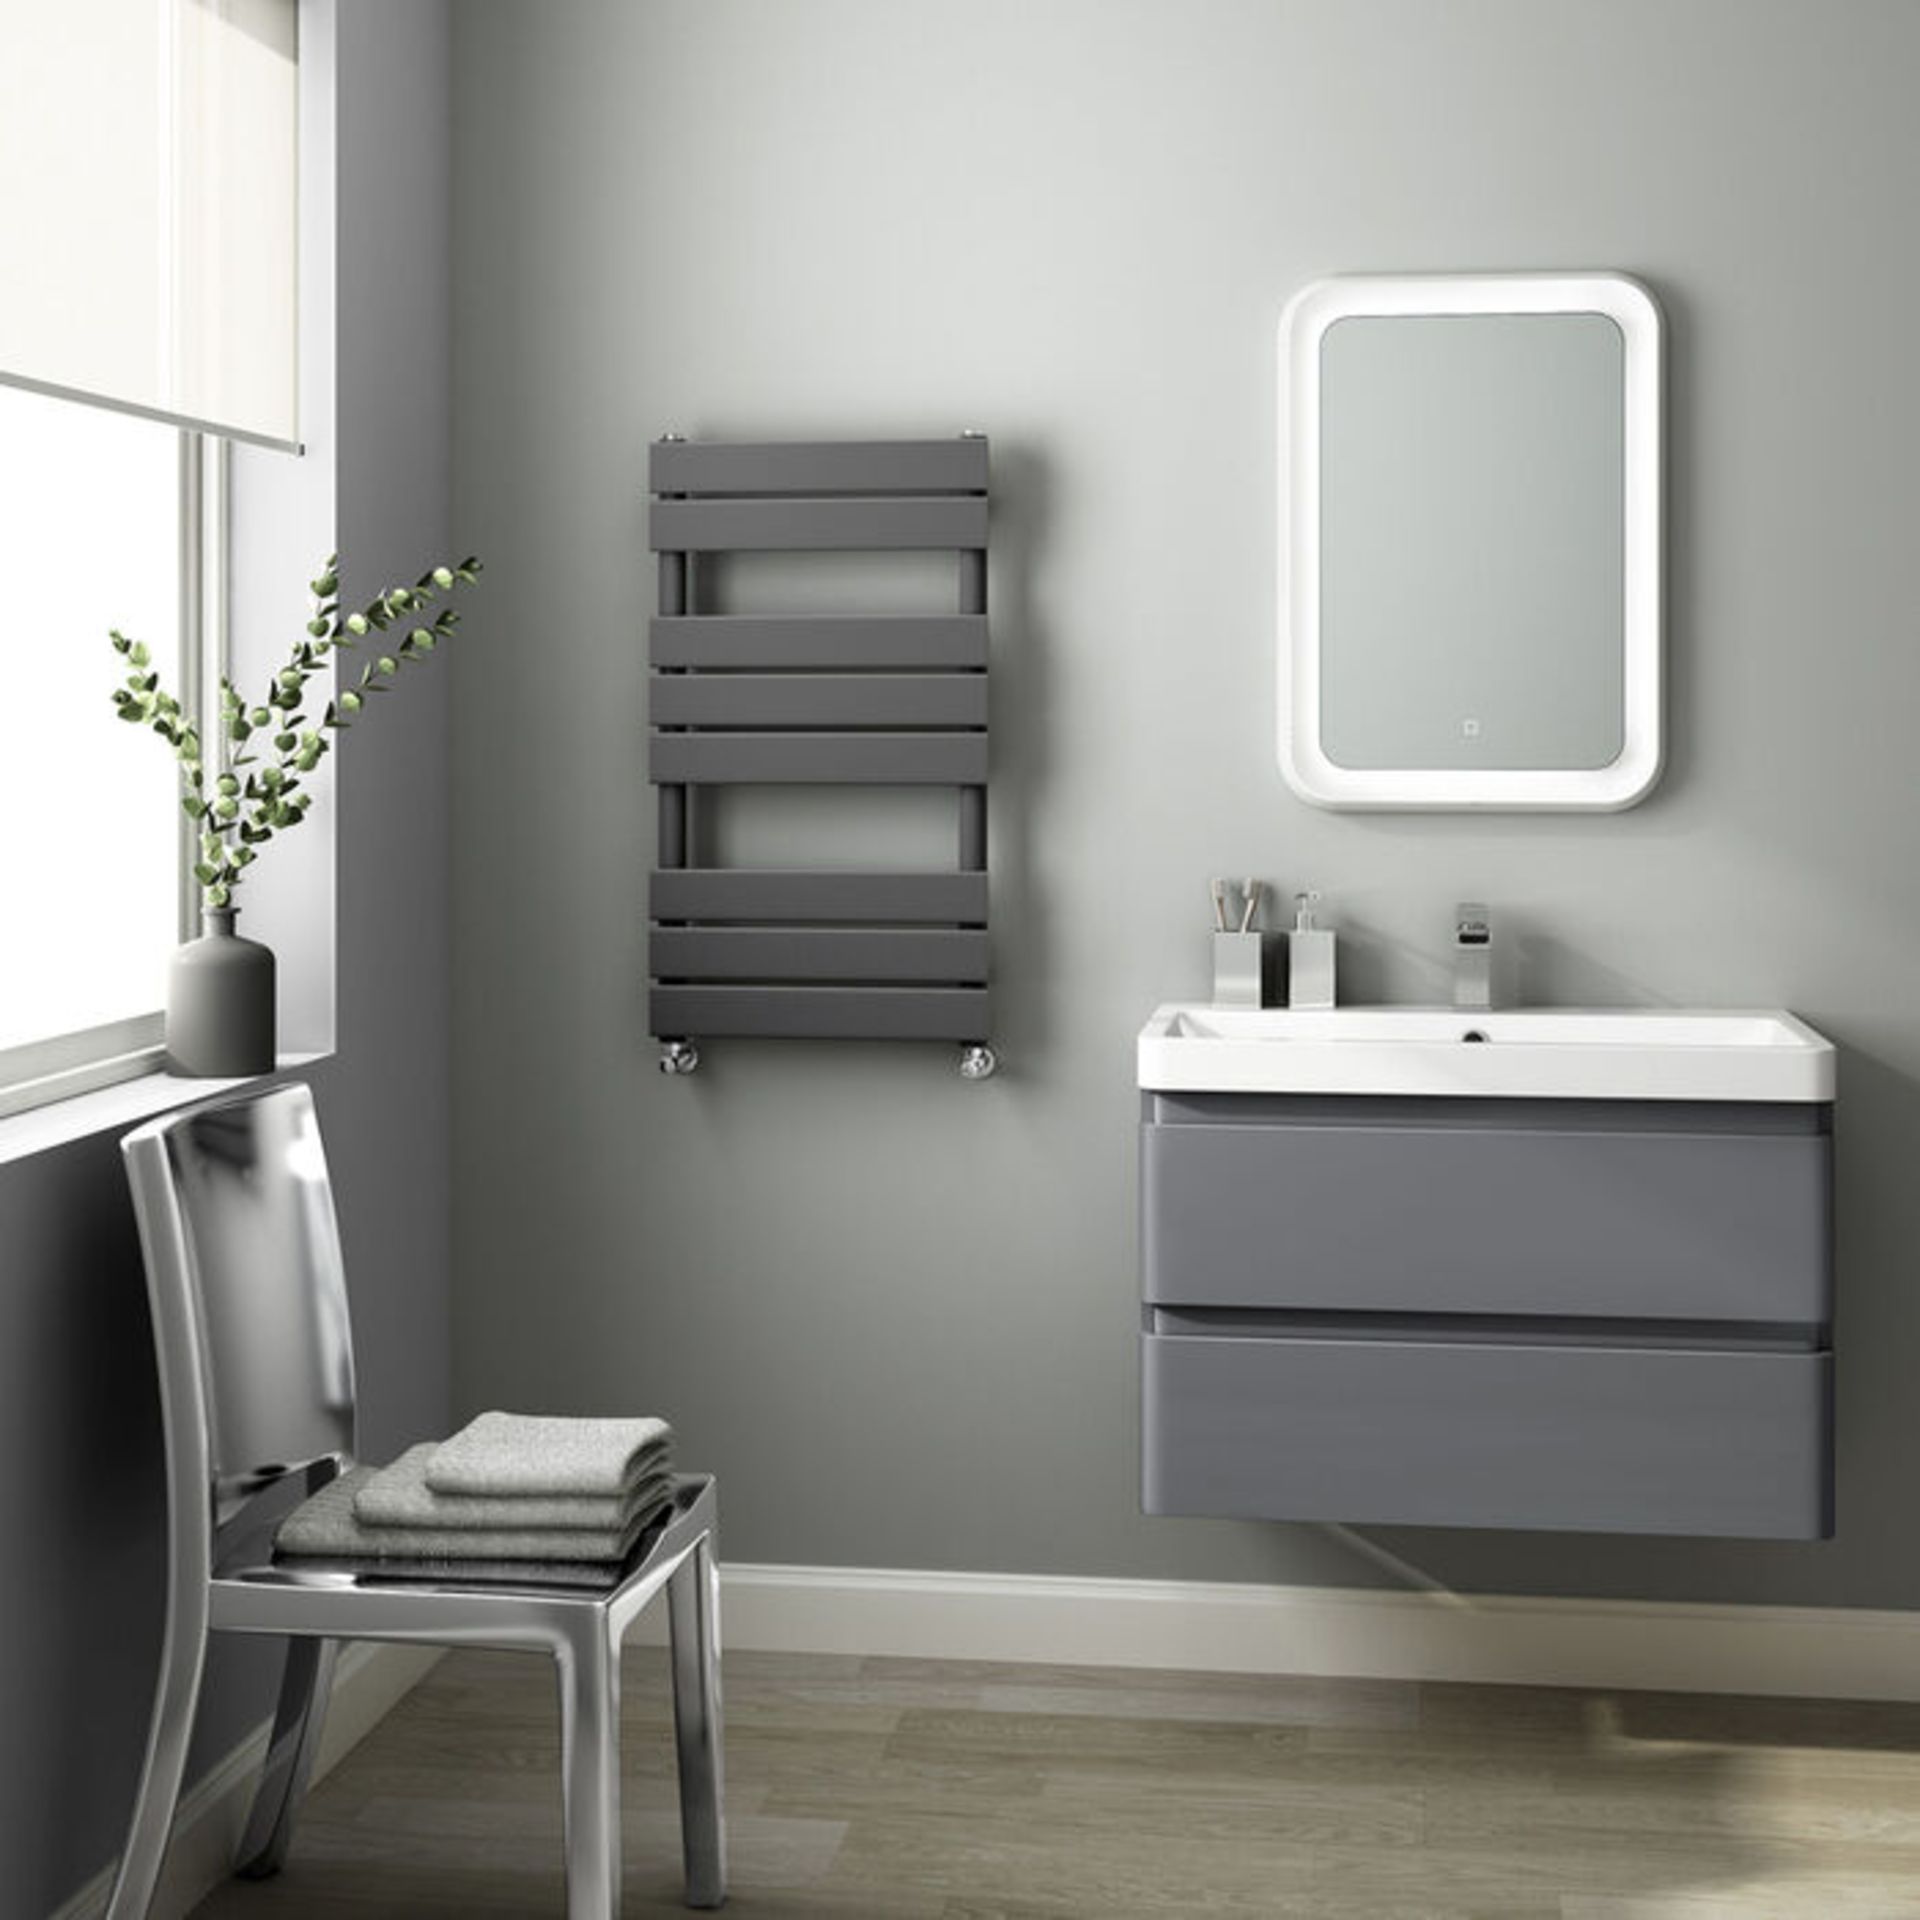 (AA53) 800x450mm Anthracite Flat Panel Ladder Towel Radiator. RRP £254.99. we use low carbon s... - Image 2 of 3